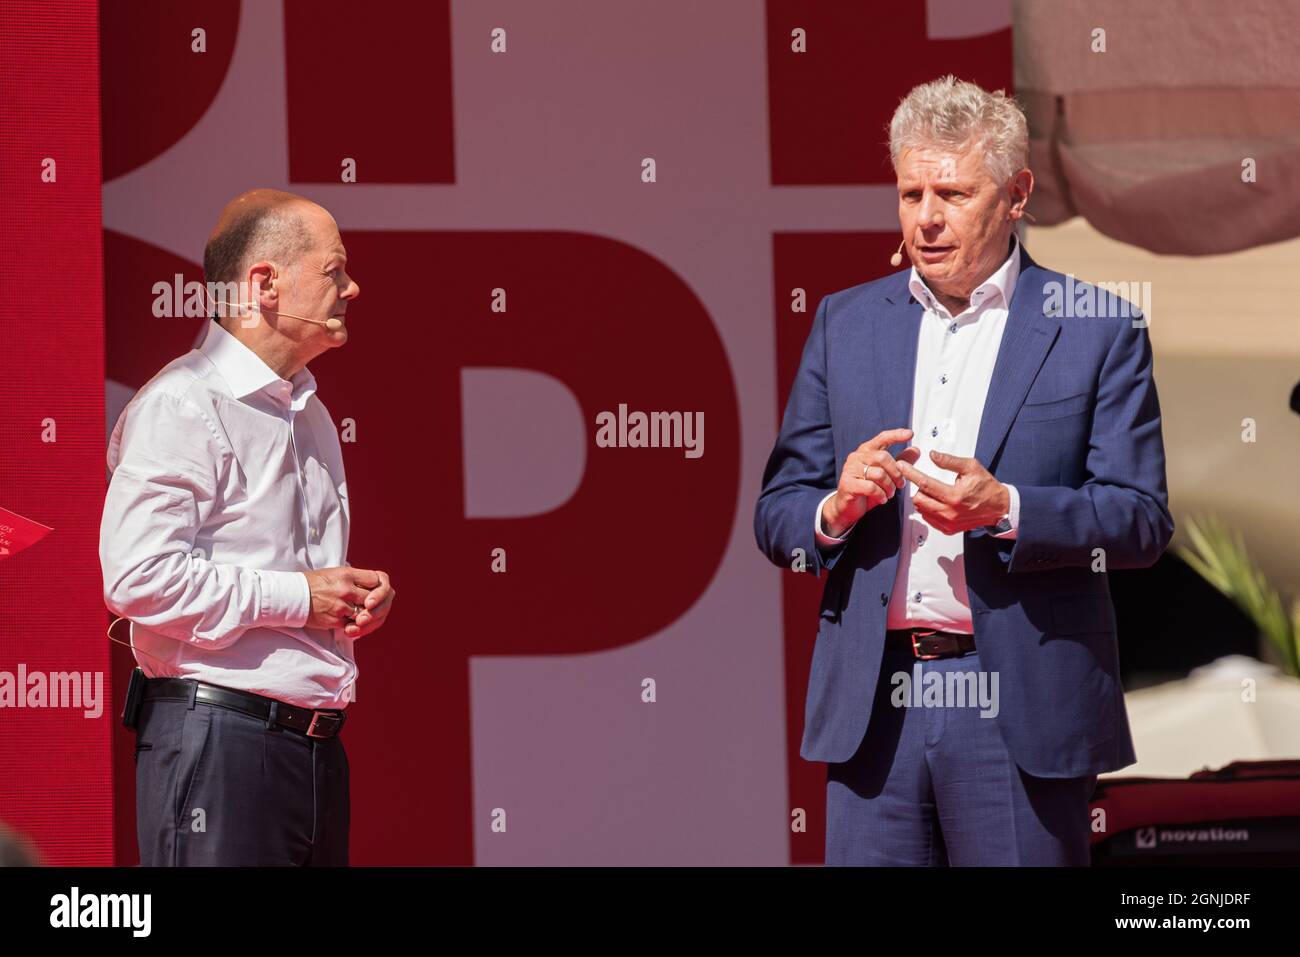 MUNICH, GERMANY - SEPTEMBER 18: Munich mayor Dieter Reiter with Olaf Scholz from the Social Democrats (SPD) on September 18, 2021 in Munich, Germany. Stock Photo